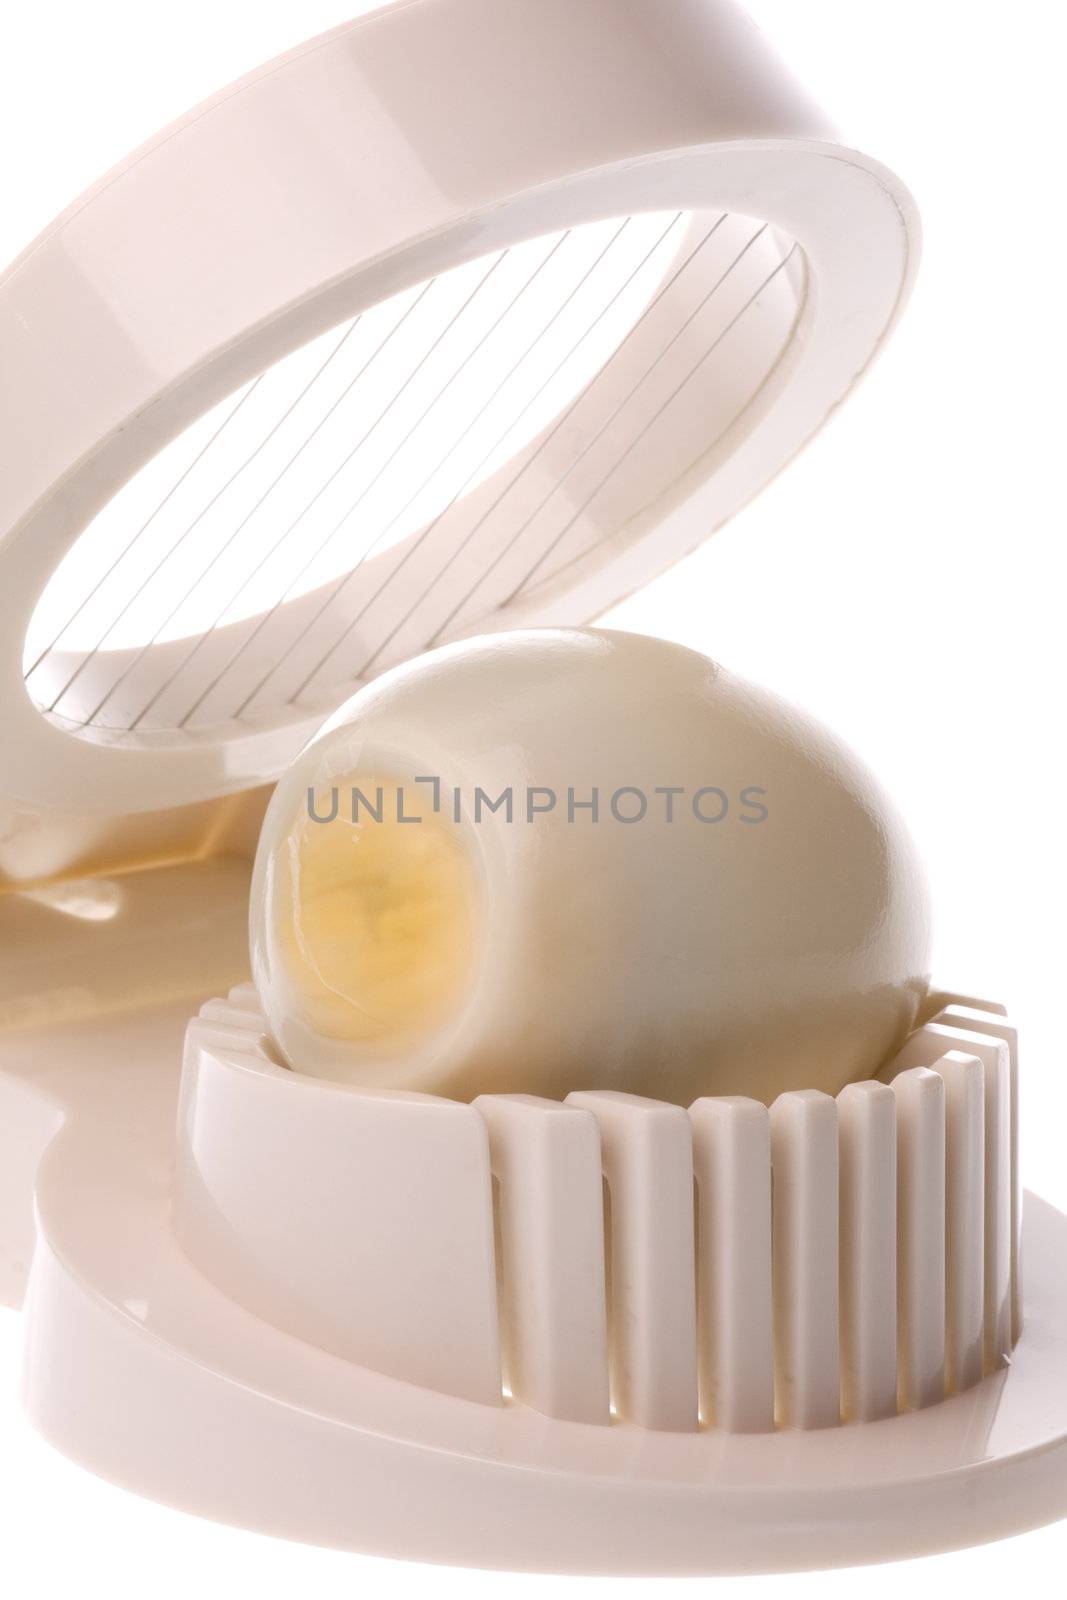 Isolated image of an egg slicer.